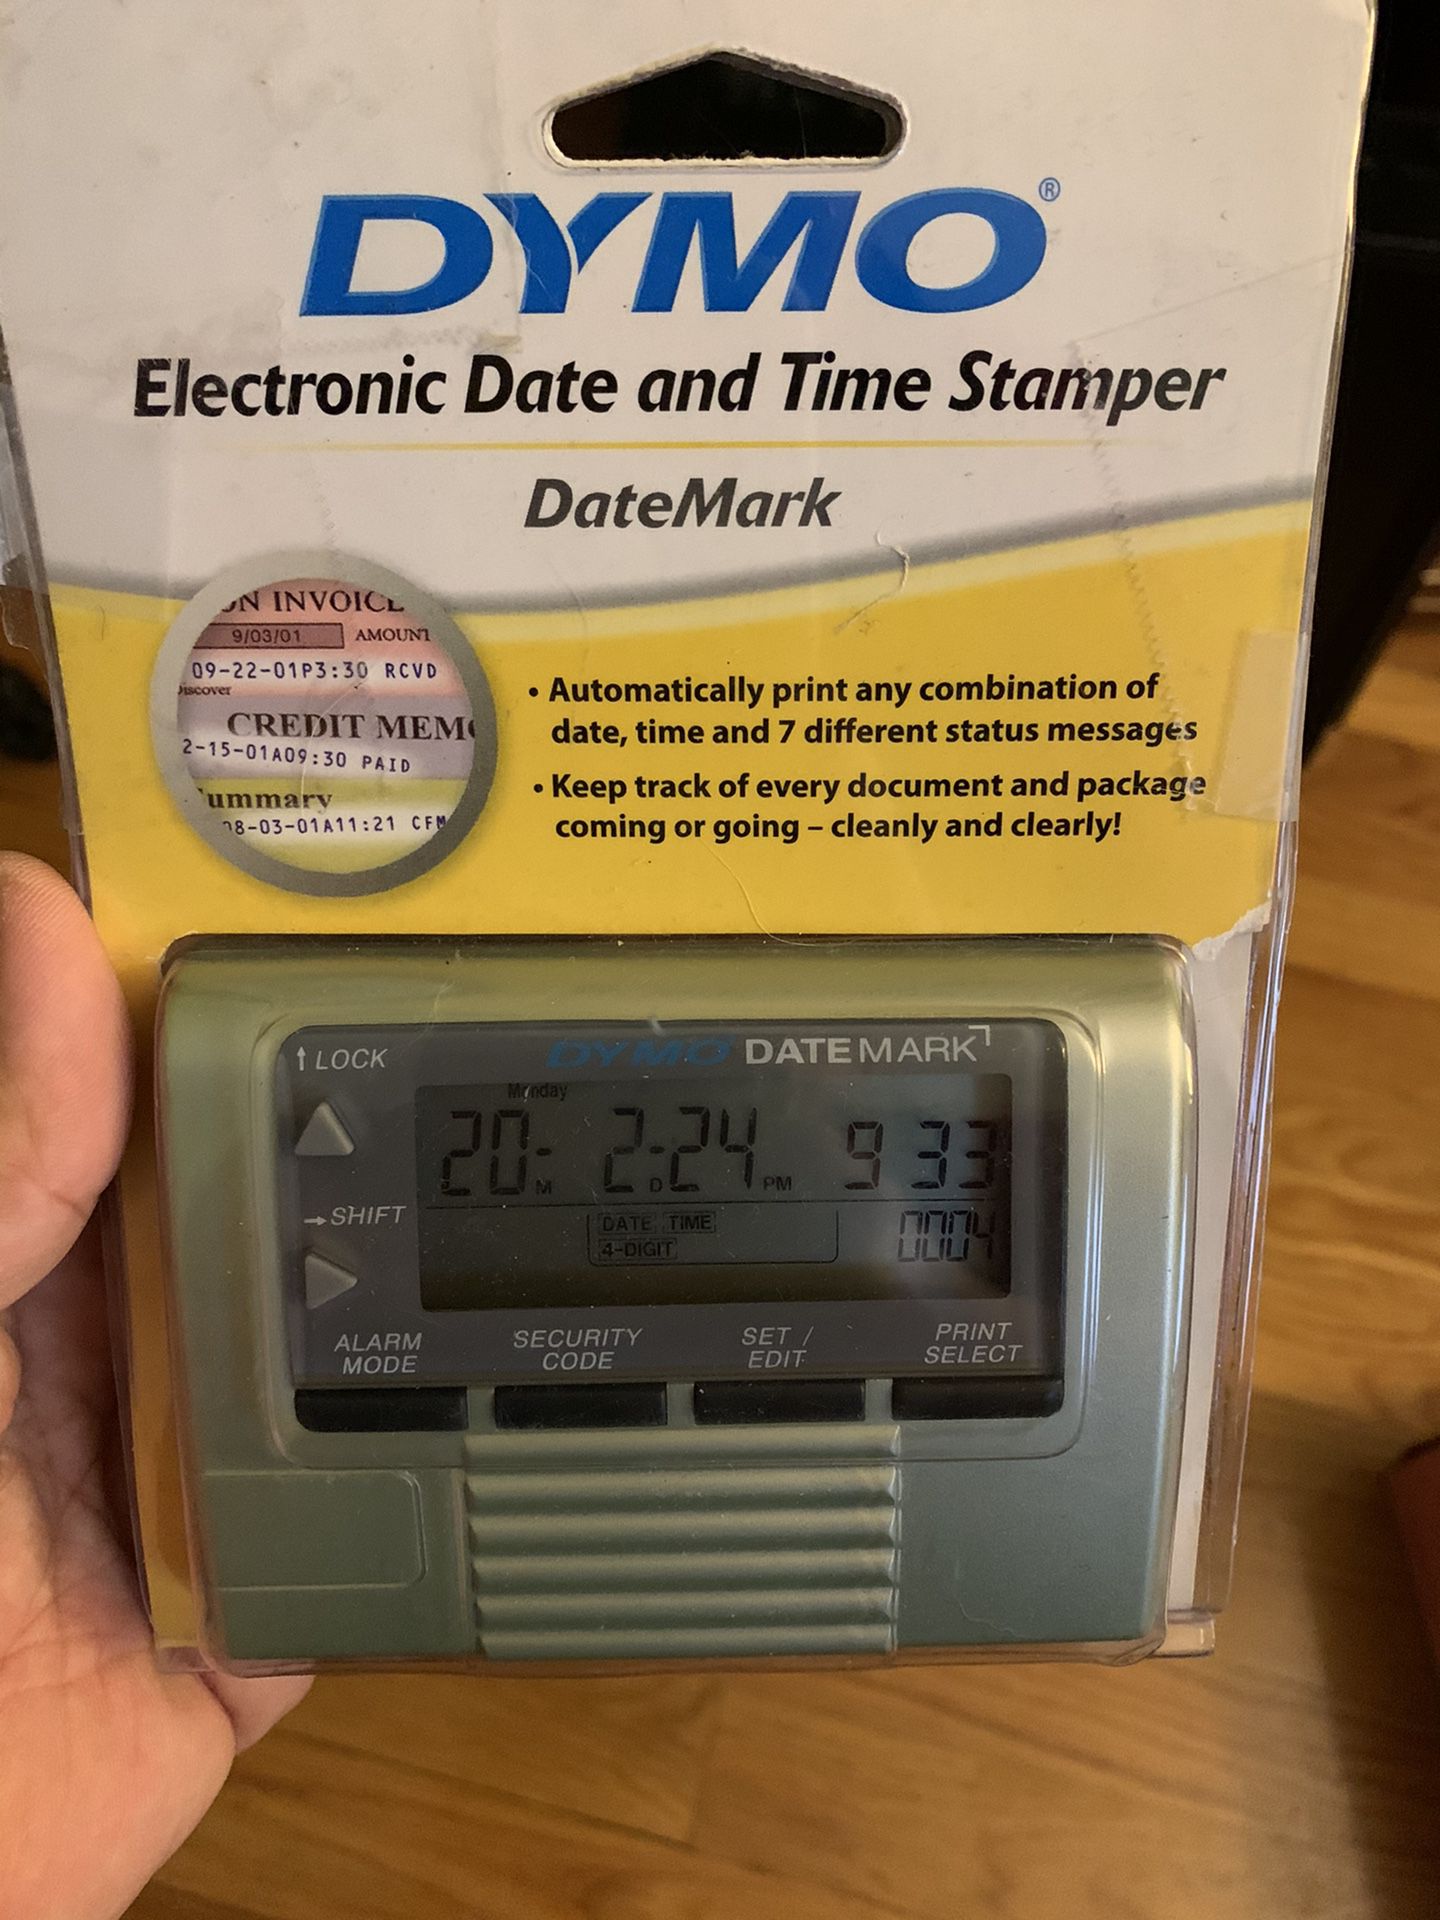 Dymo electronic date and time stamper